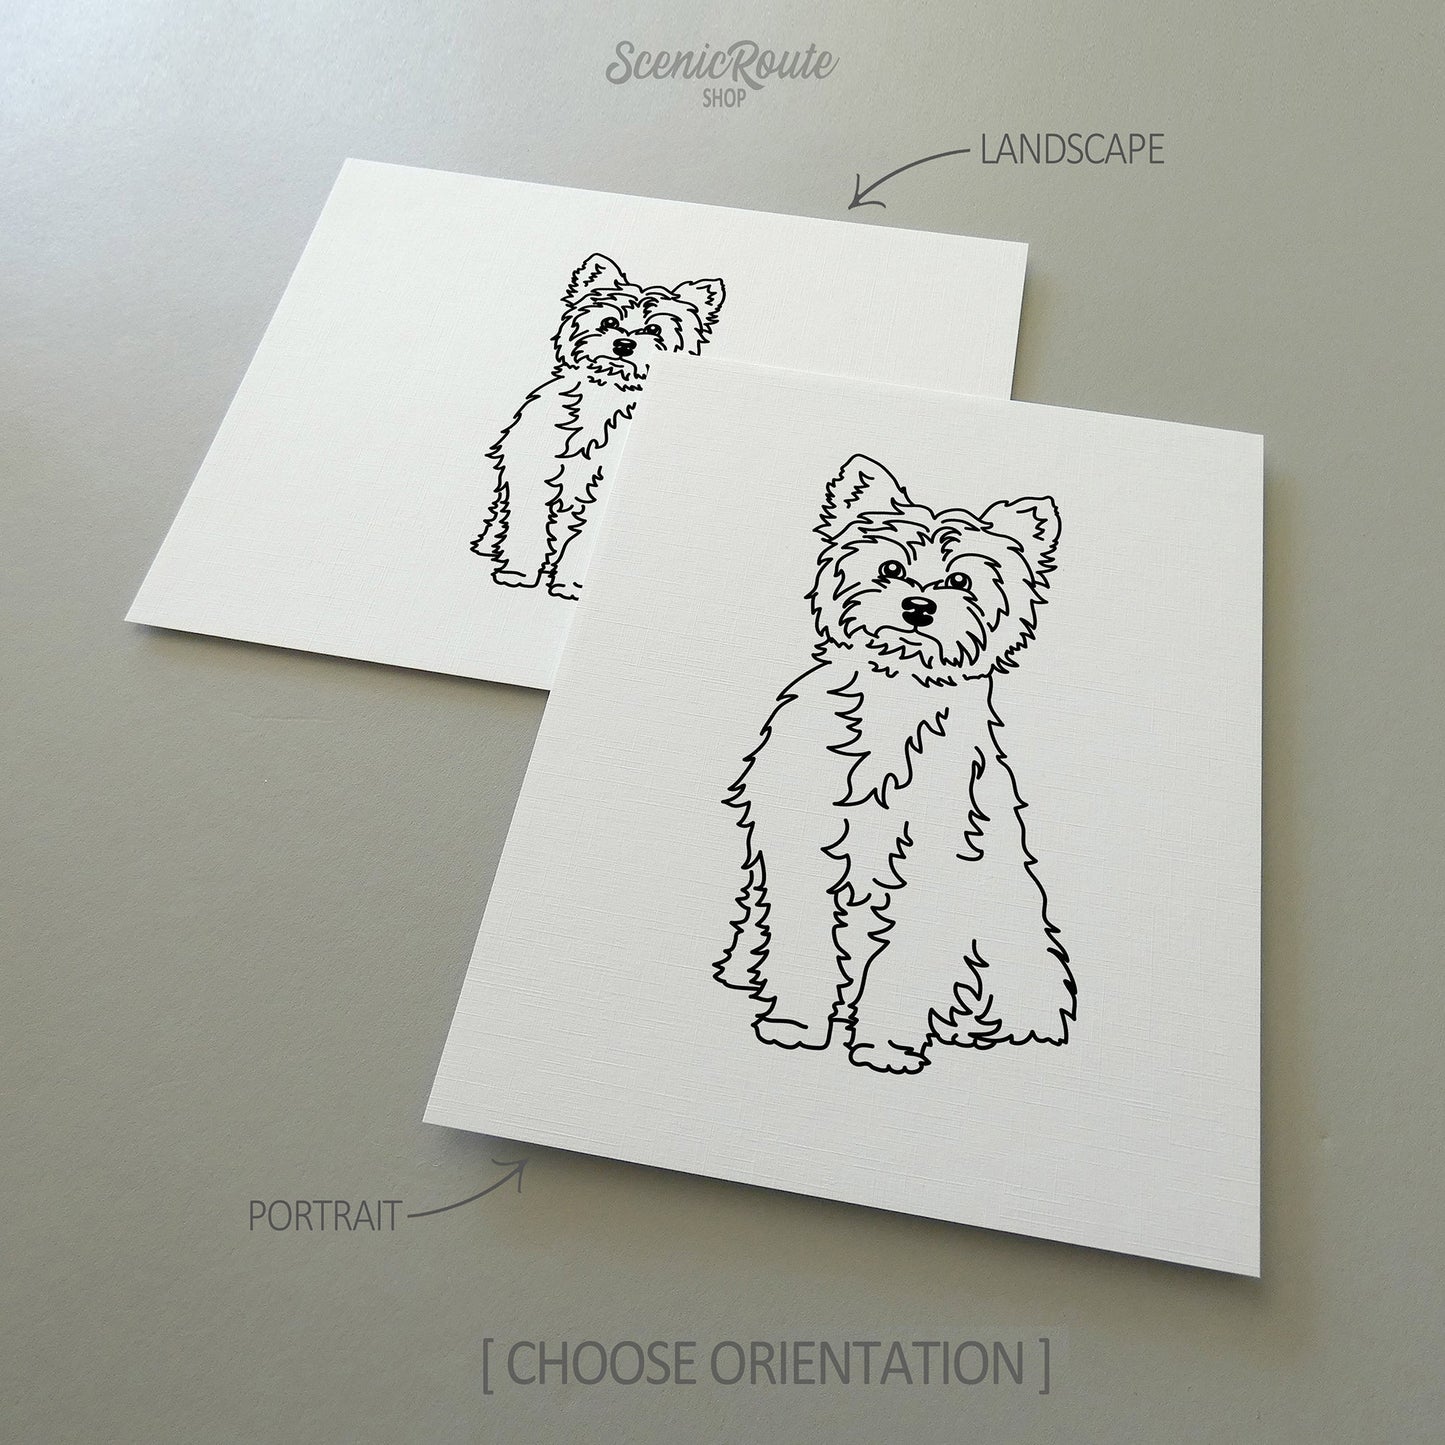 Two line art drawings of a Yorkshire Terrier dog on white linen paper with a gray background.  The pieces are shown in portrait and landscape orientation for the available art print options.